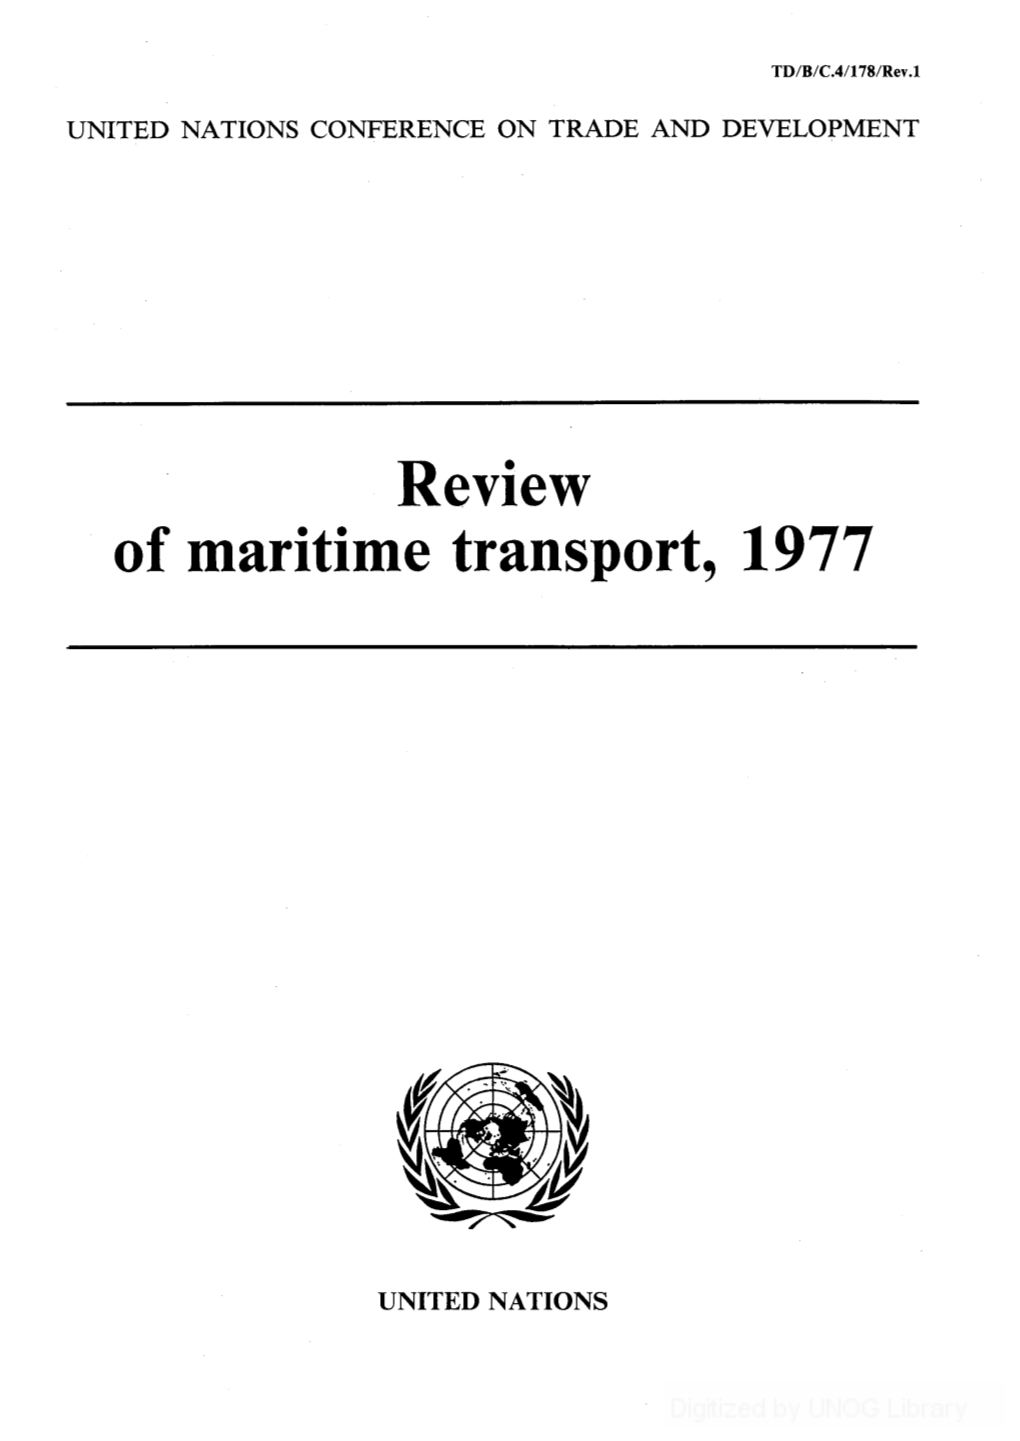 Review of Maritime Transport 1977